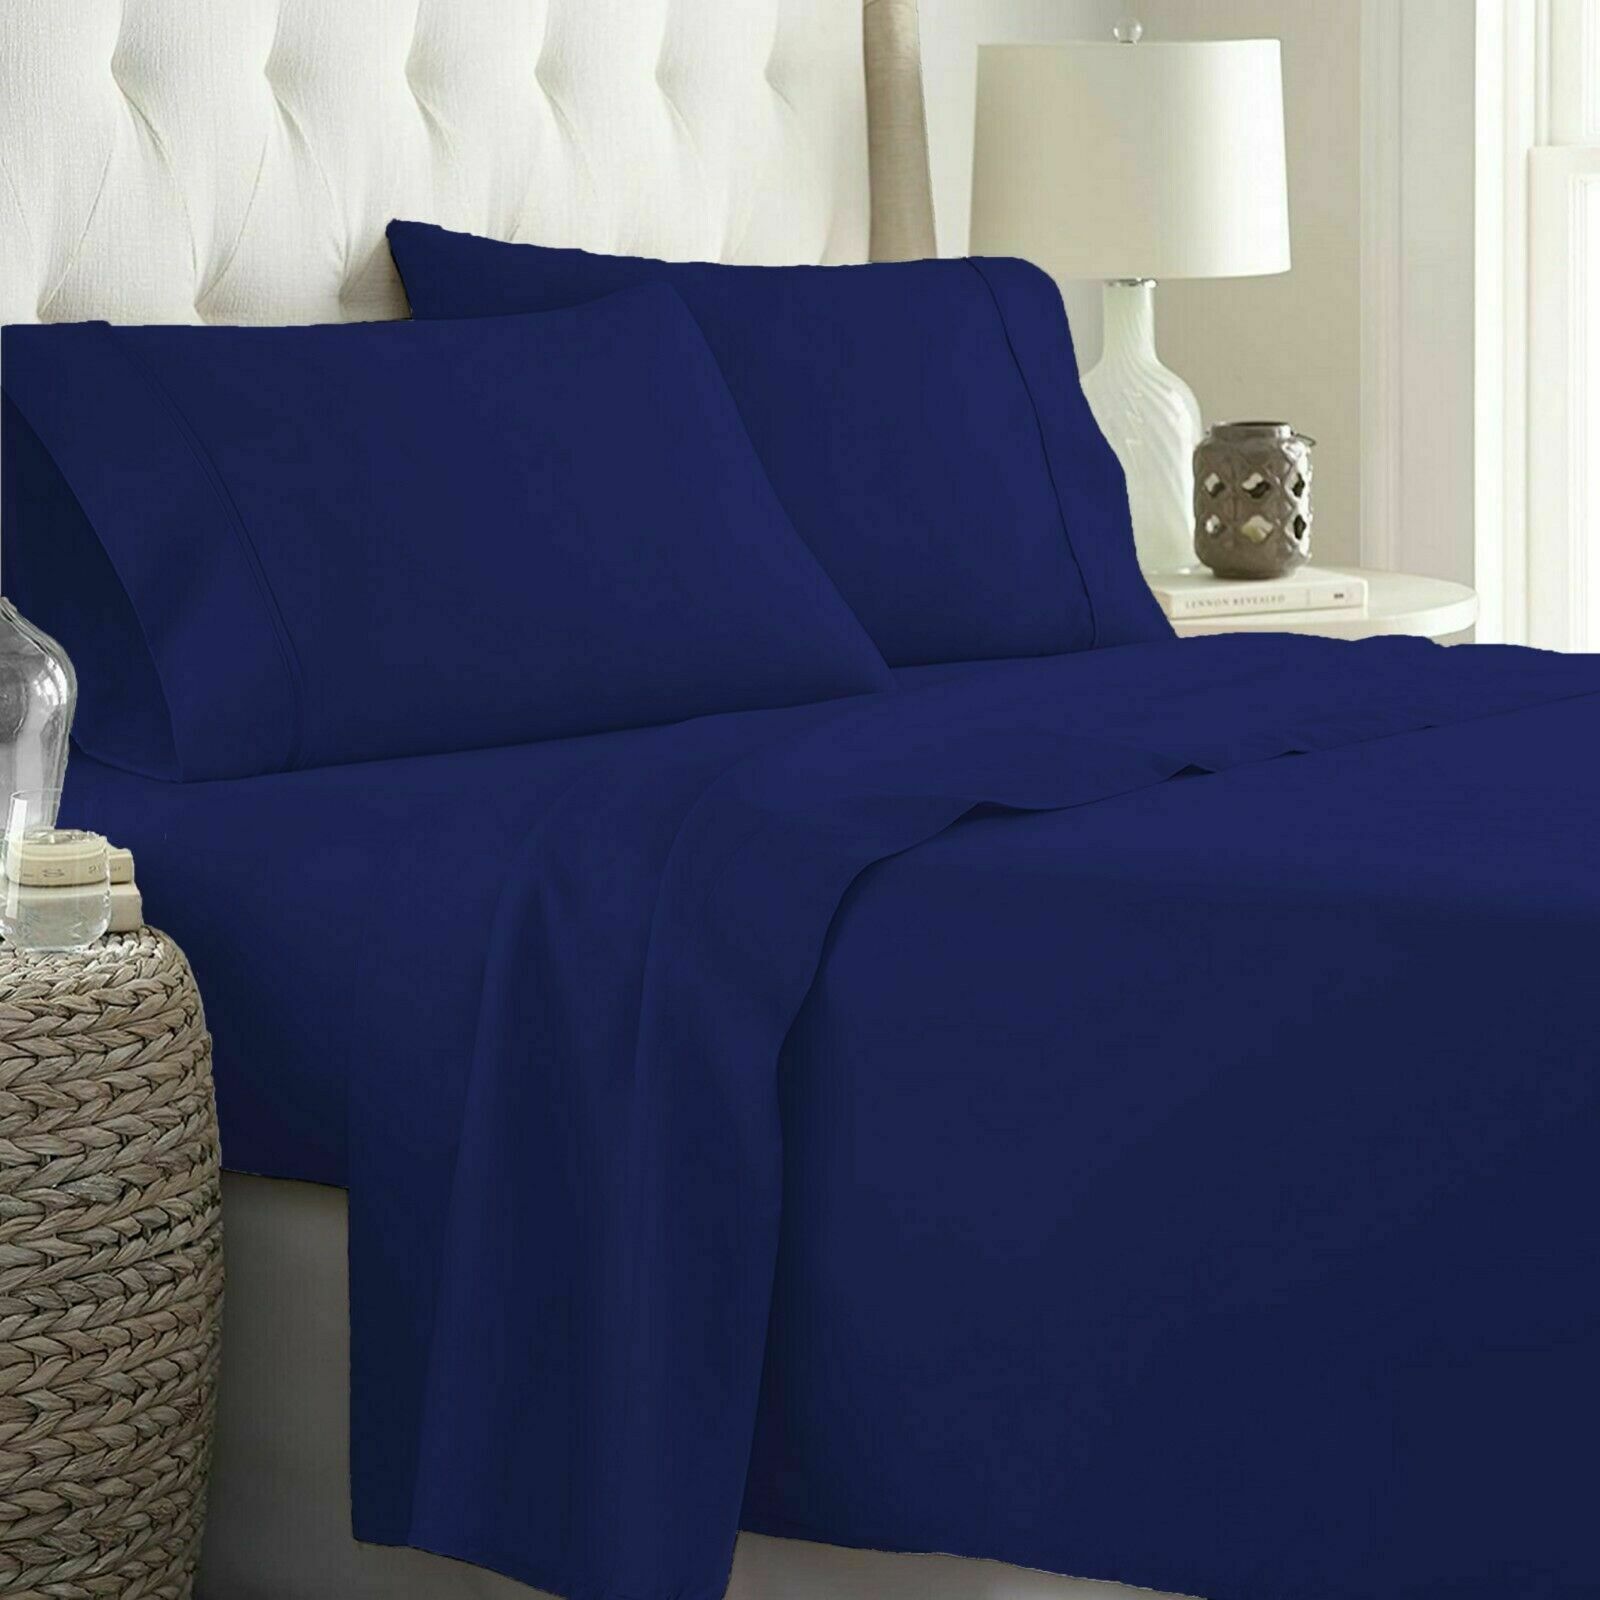 Twin XL/Queen/King Hotel Style In Navy Blue 700 TC 100%Cotton Bedding Items